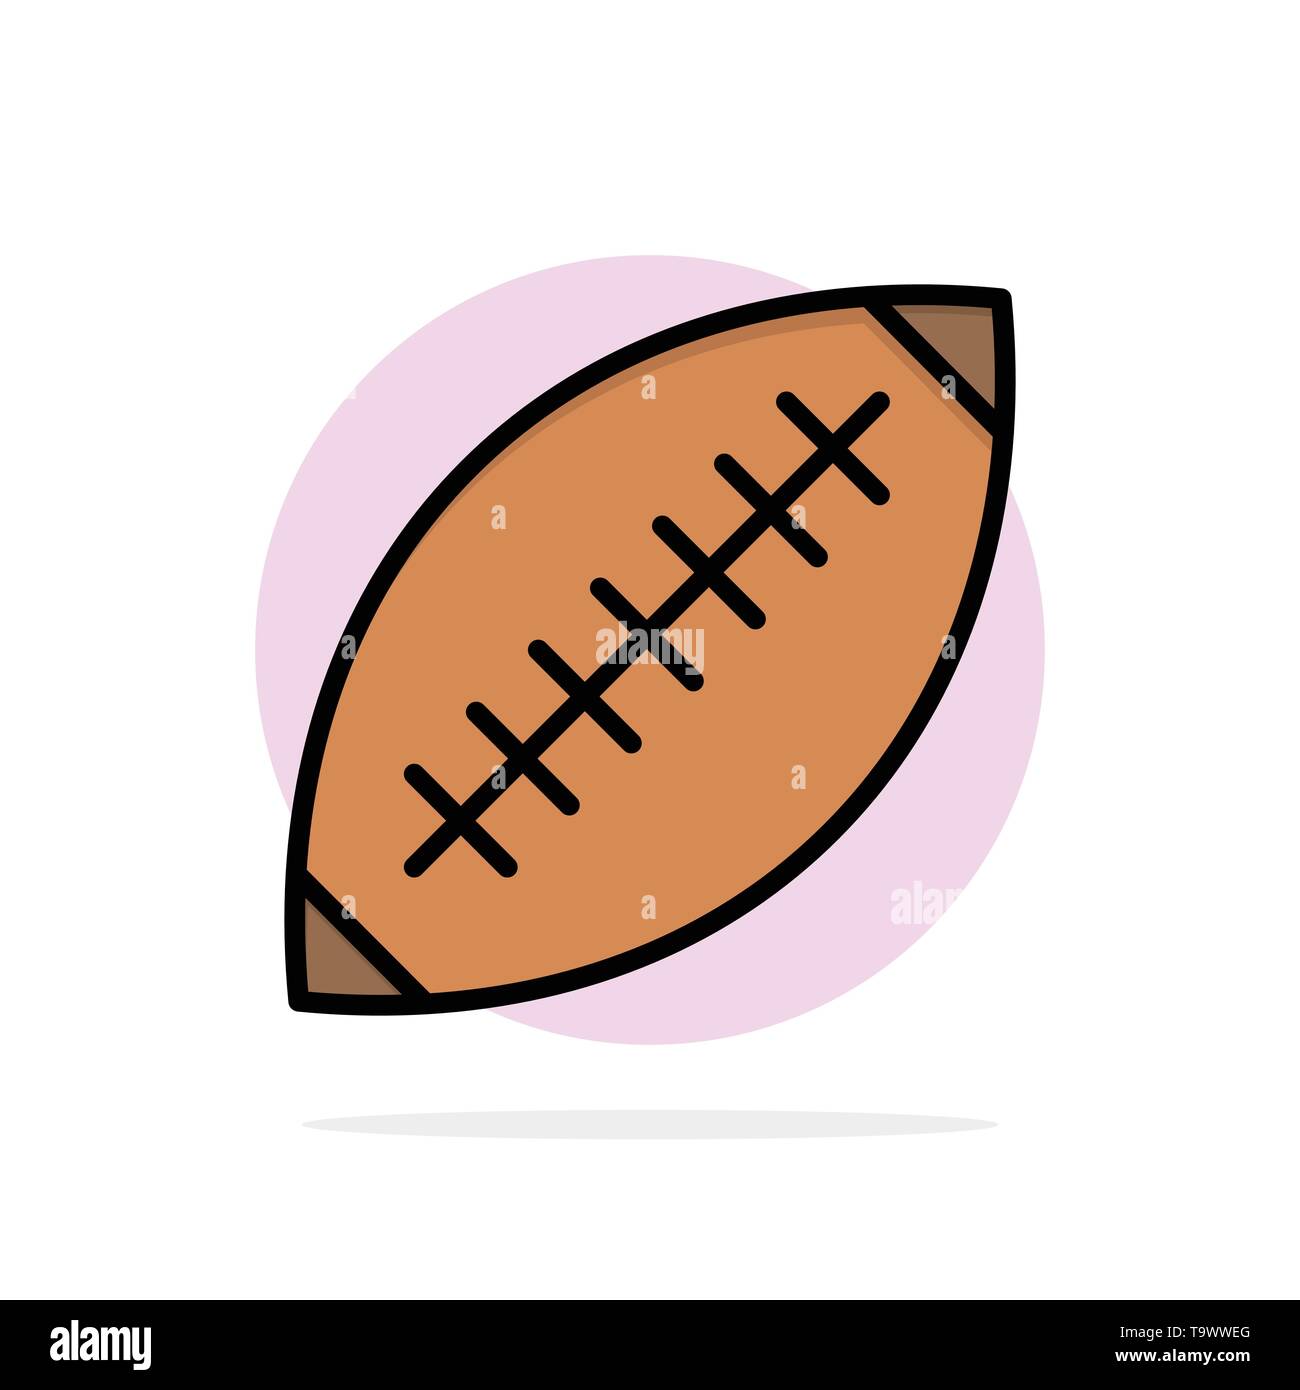 Afl, Australia, Football, Rugby, Rugby Ball, Sport, Sydney Abstract Circle Background Flat color Icon Stock Vector